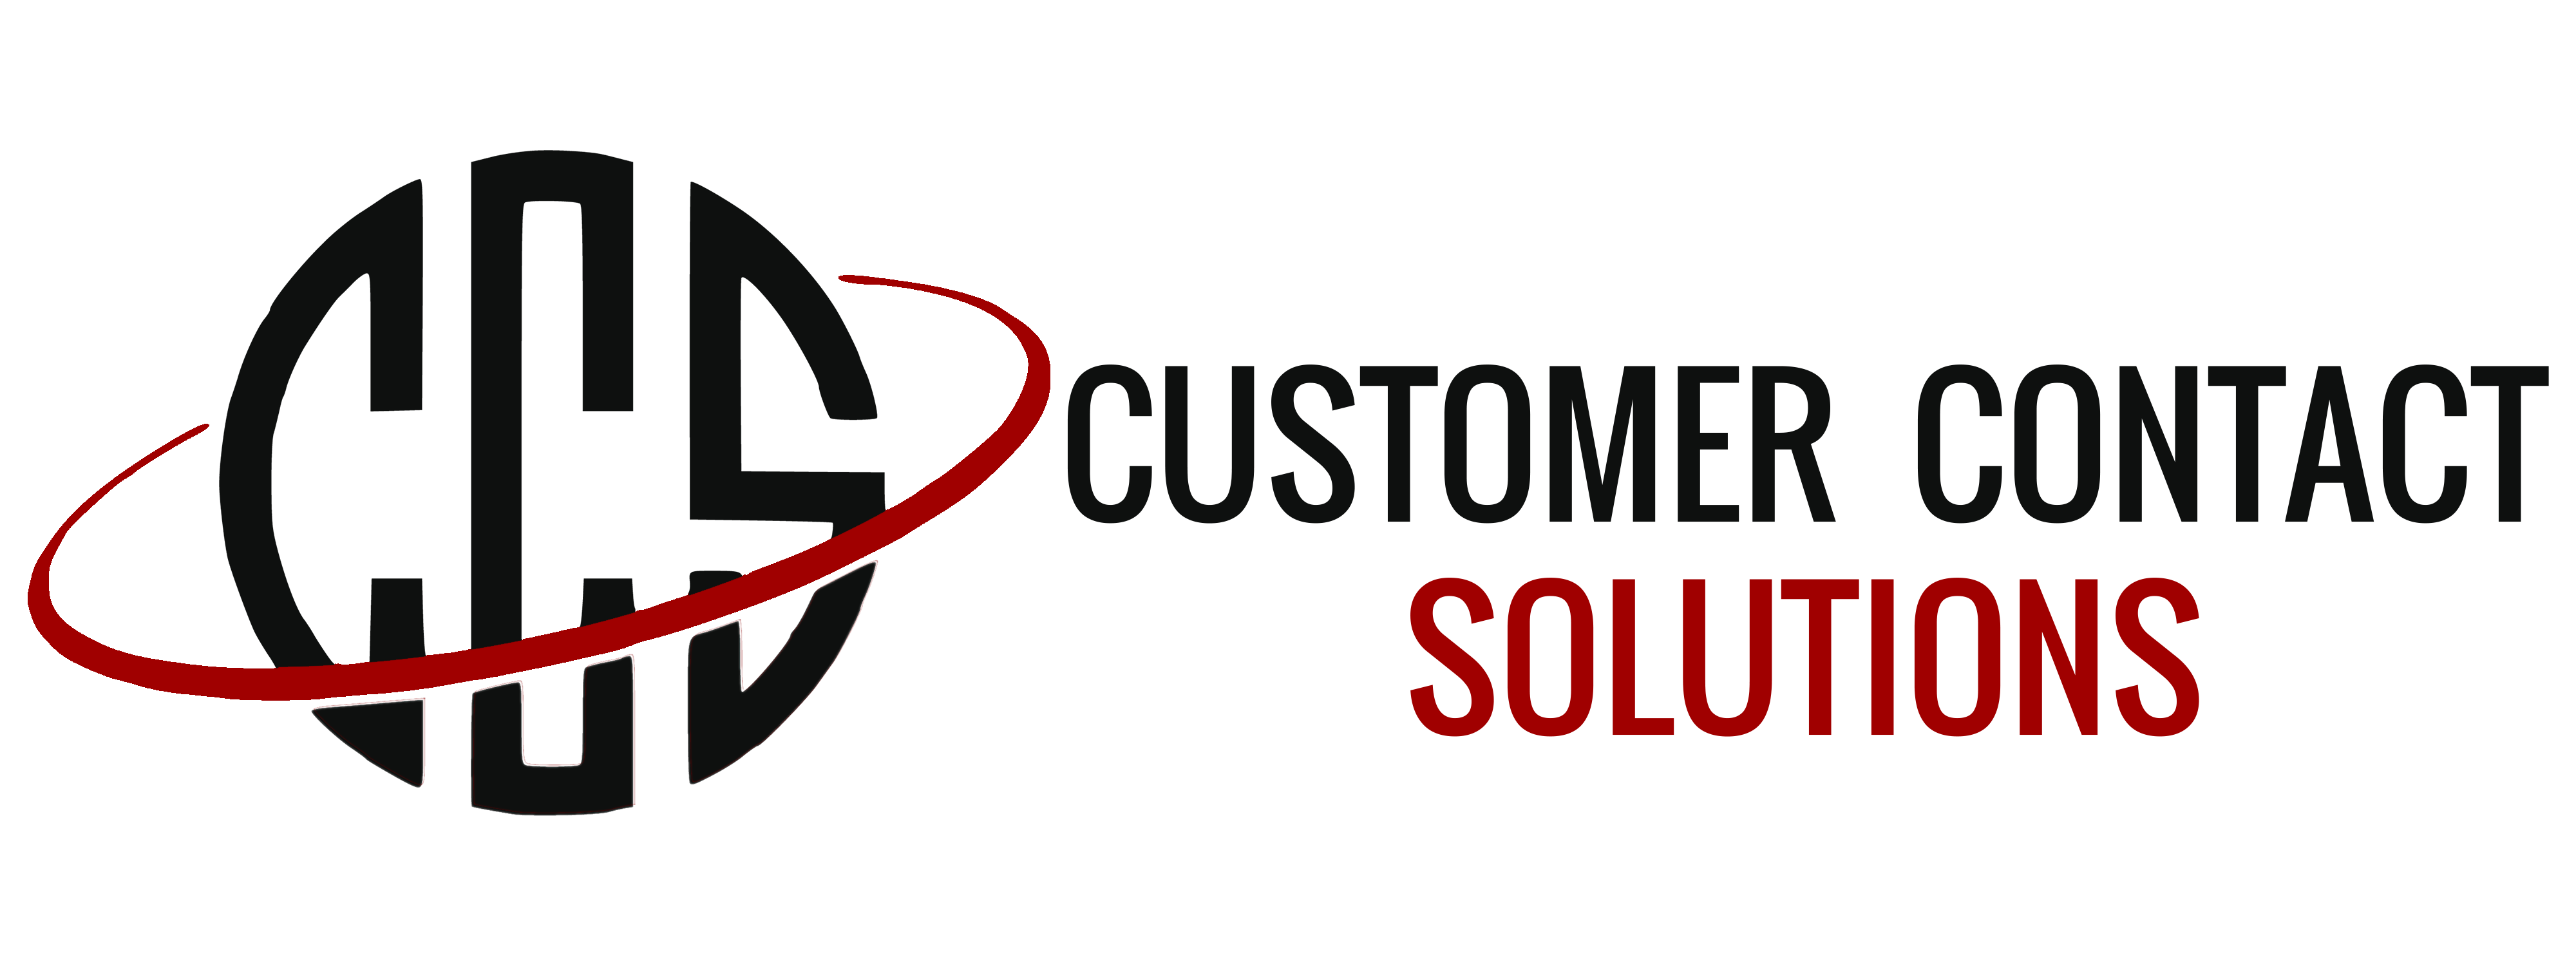 Customer Contact Solutions – 2.9/0.30